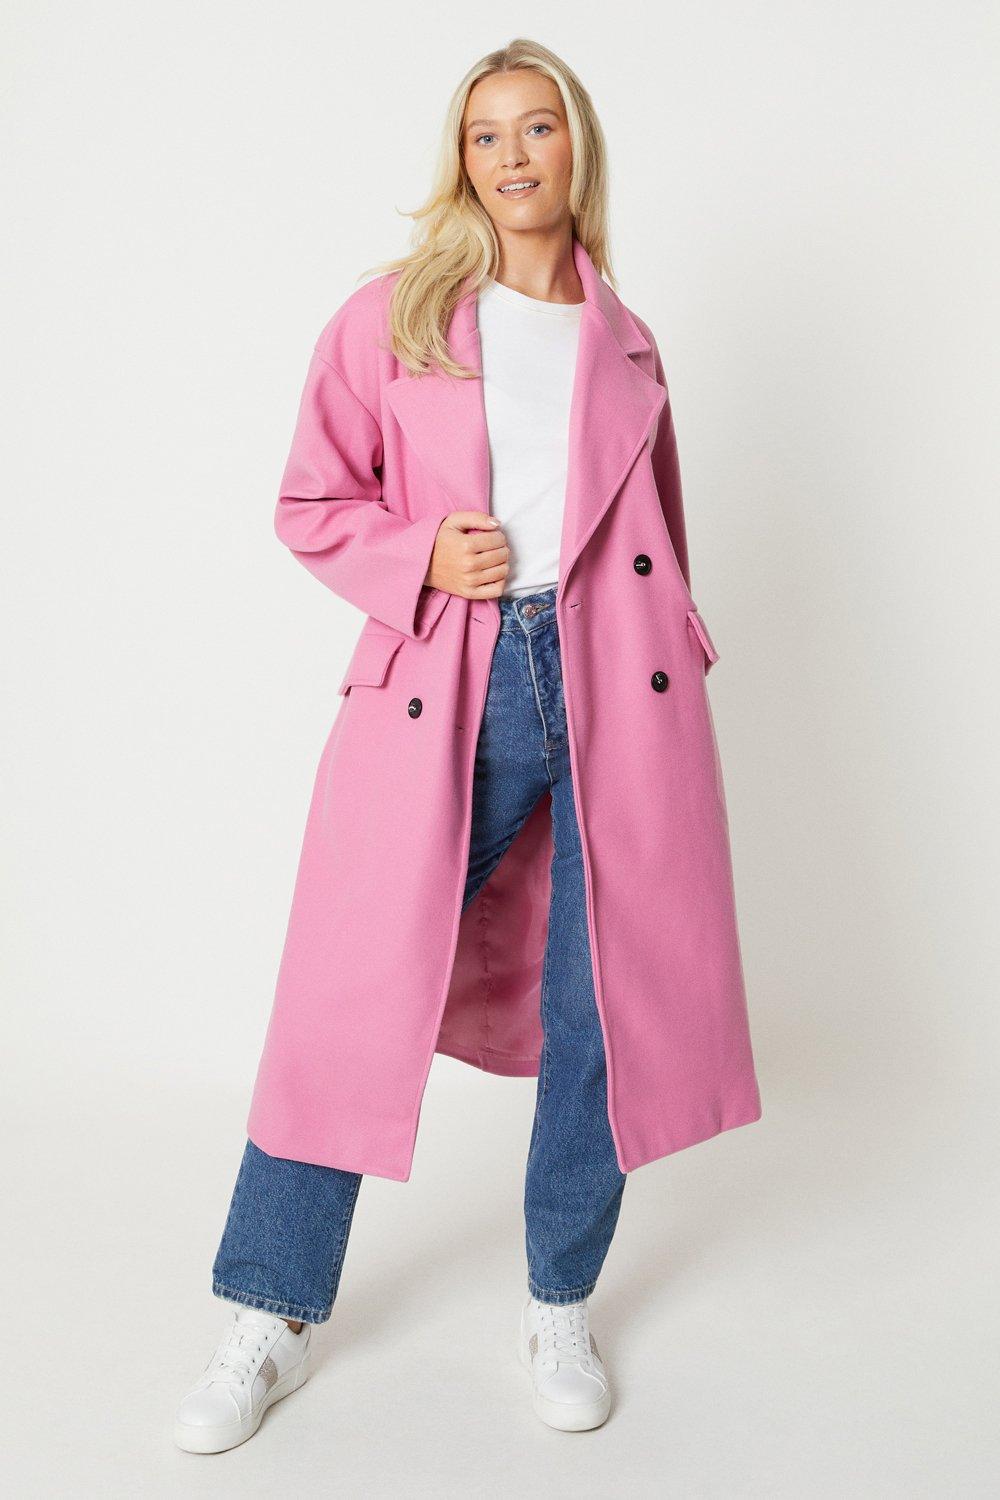 Women's Double Breasted Wool Look Coat - pink - M